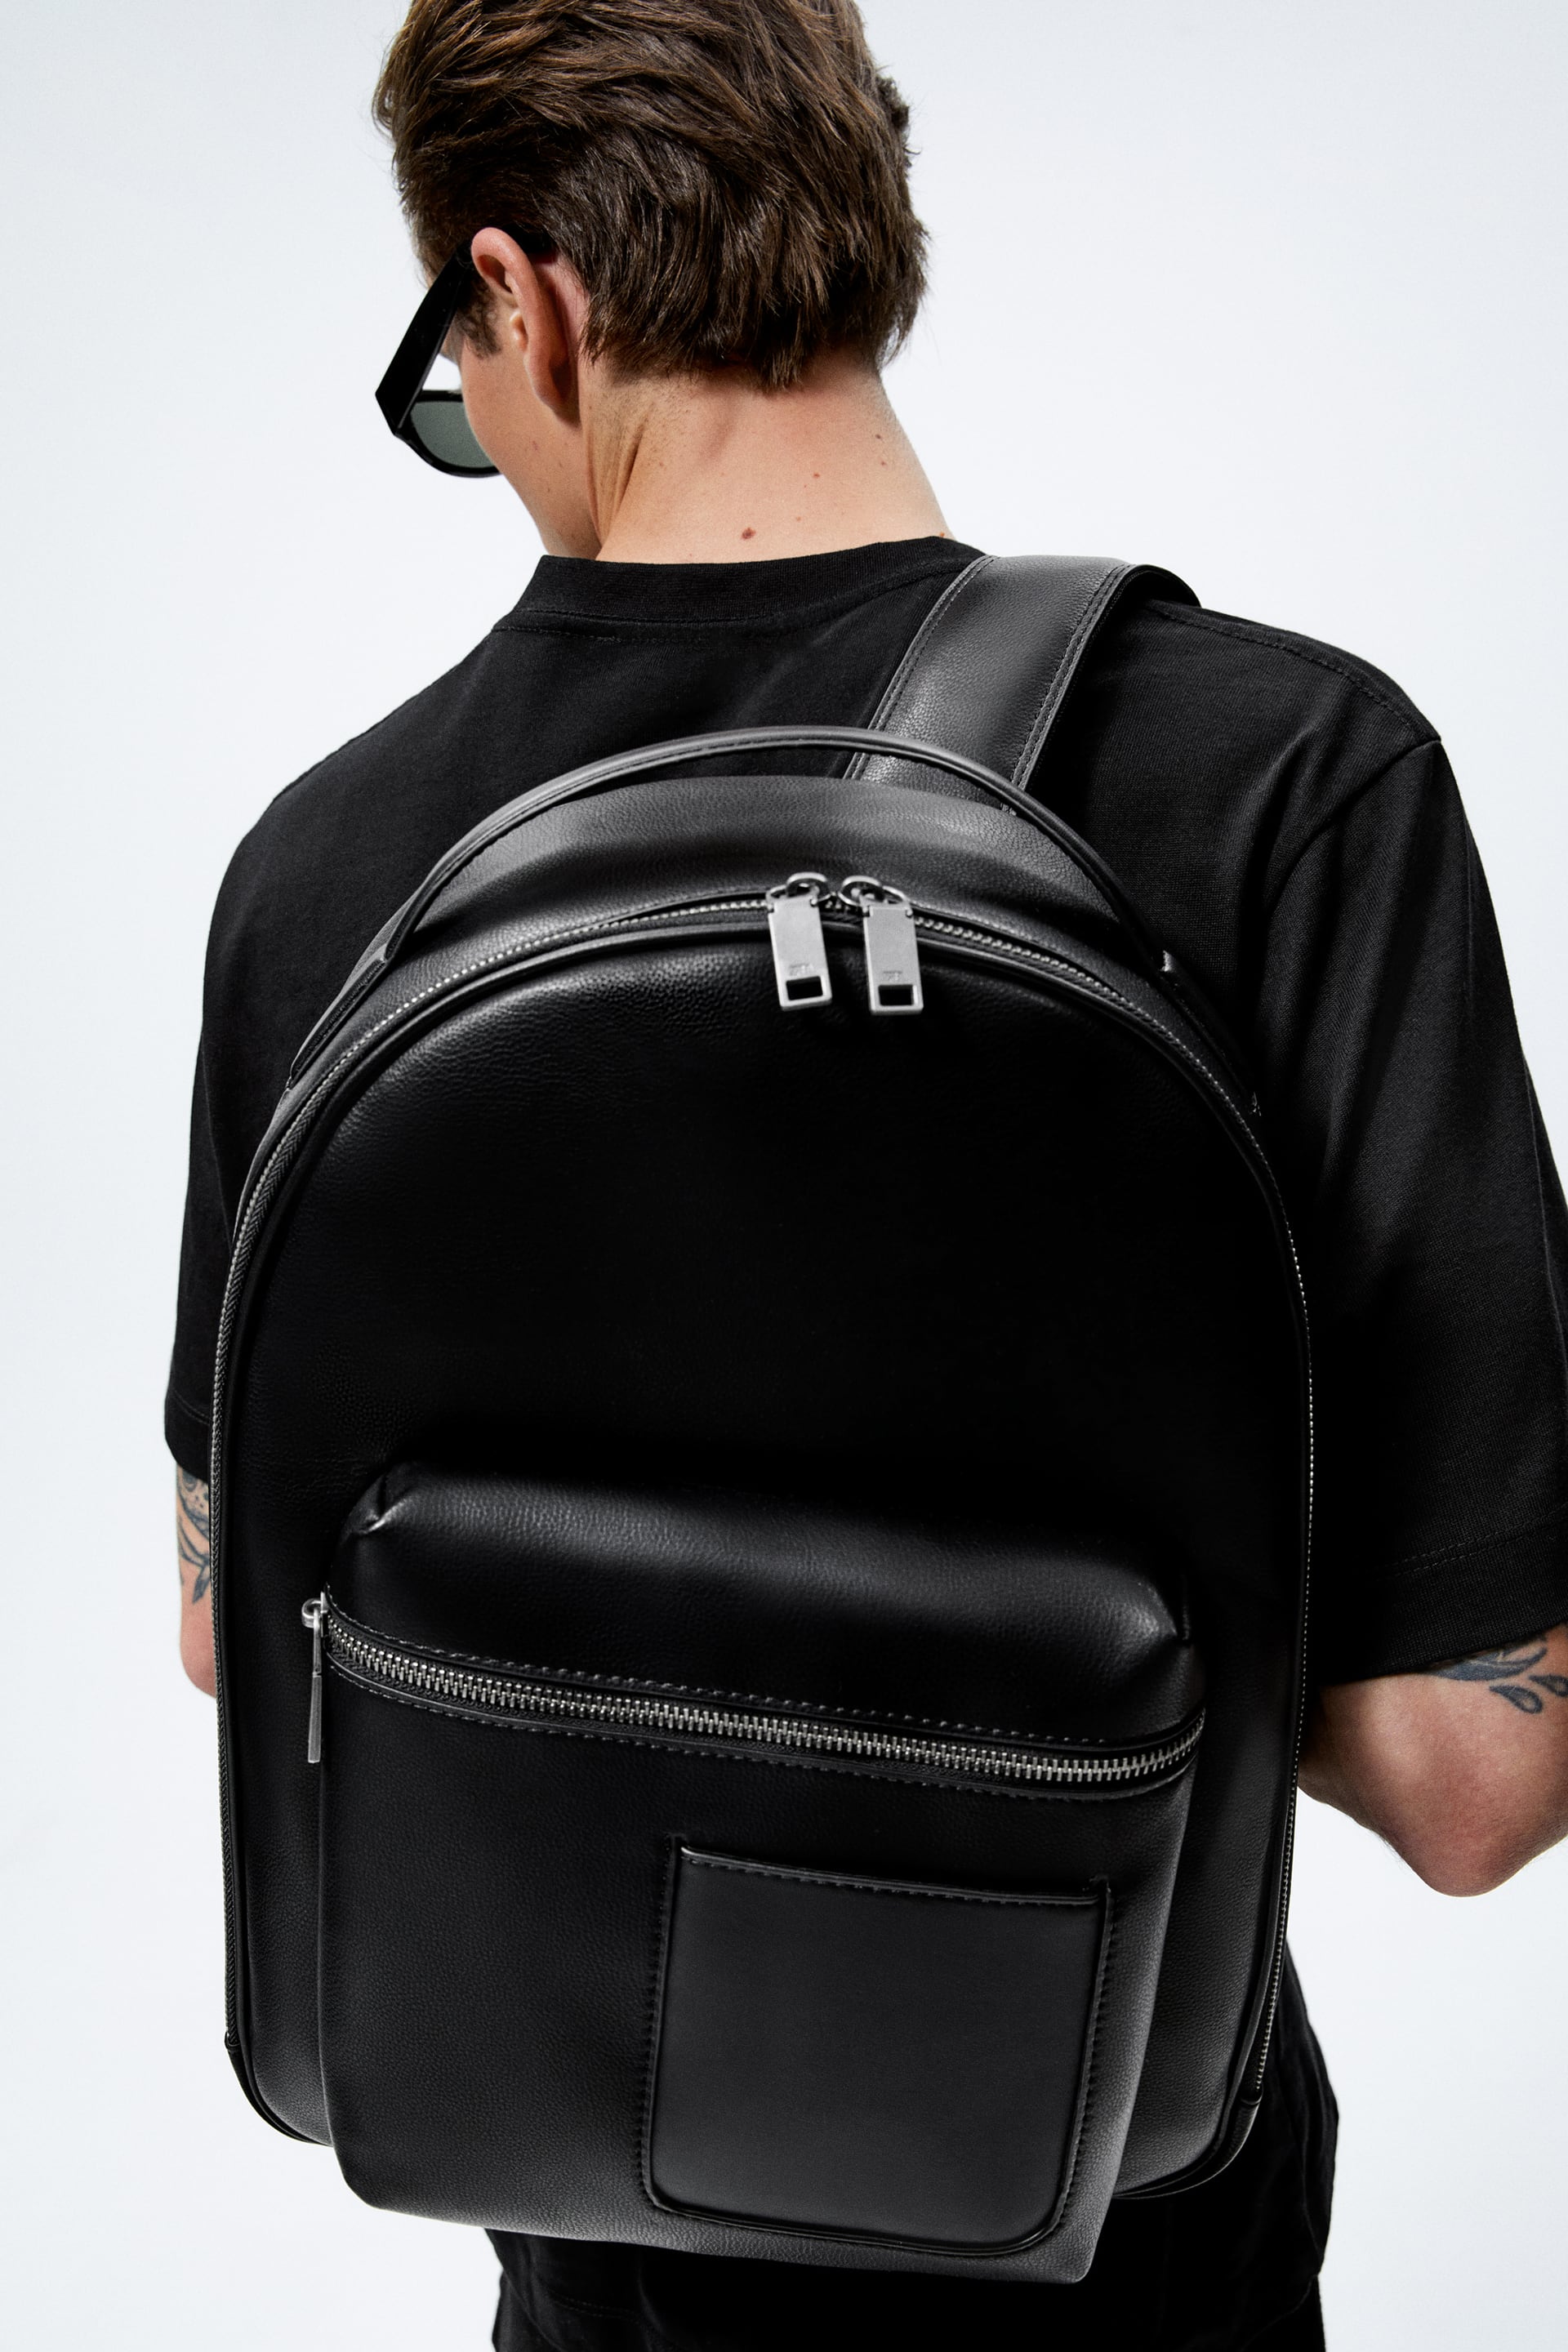 On board comedy Absolute MONOCHROME BACKPACK - Brown | ZARA Singapore